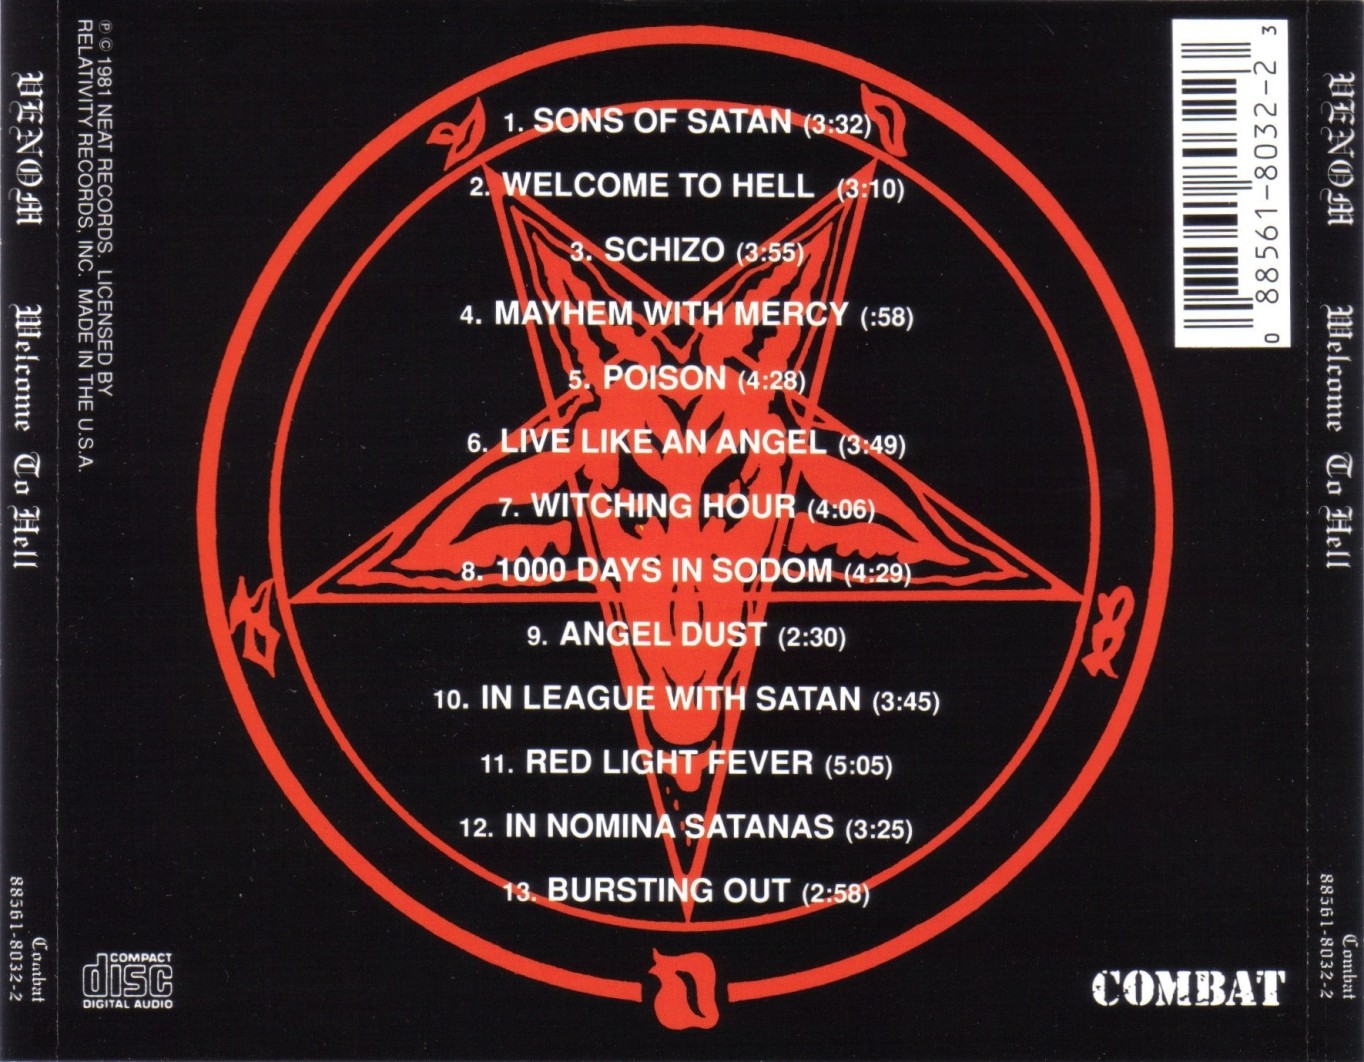 [[AllCDCovers]_venom_welcome_to_hell_1981_retail_cd-back.jpg]